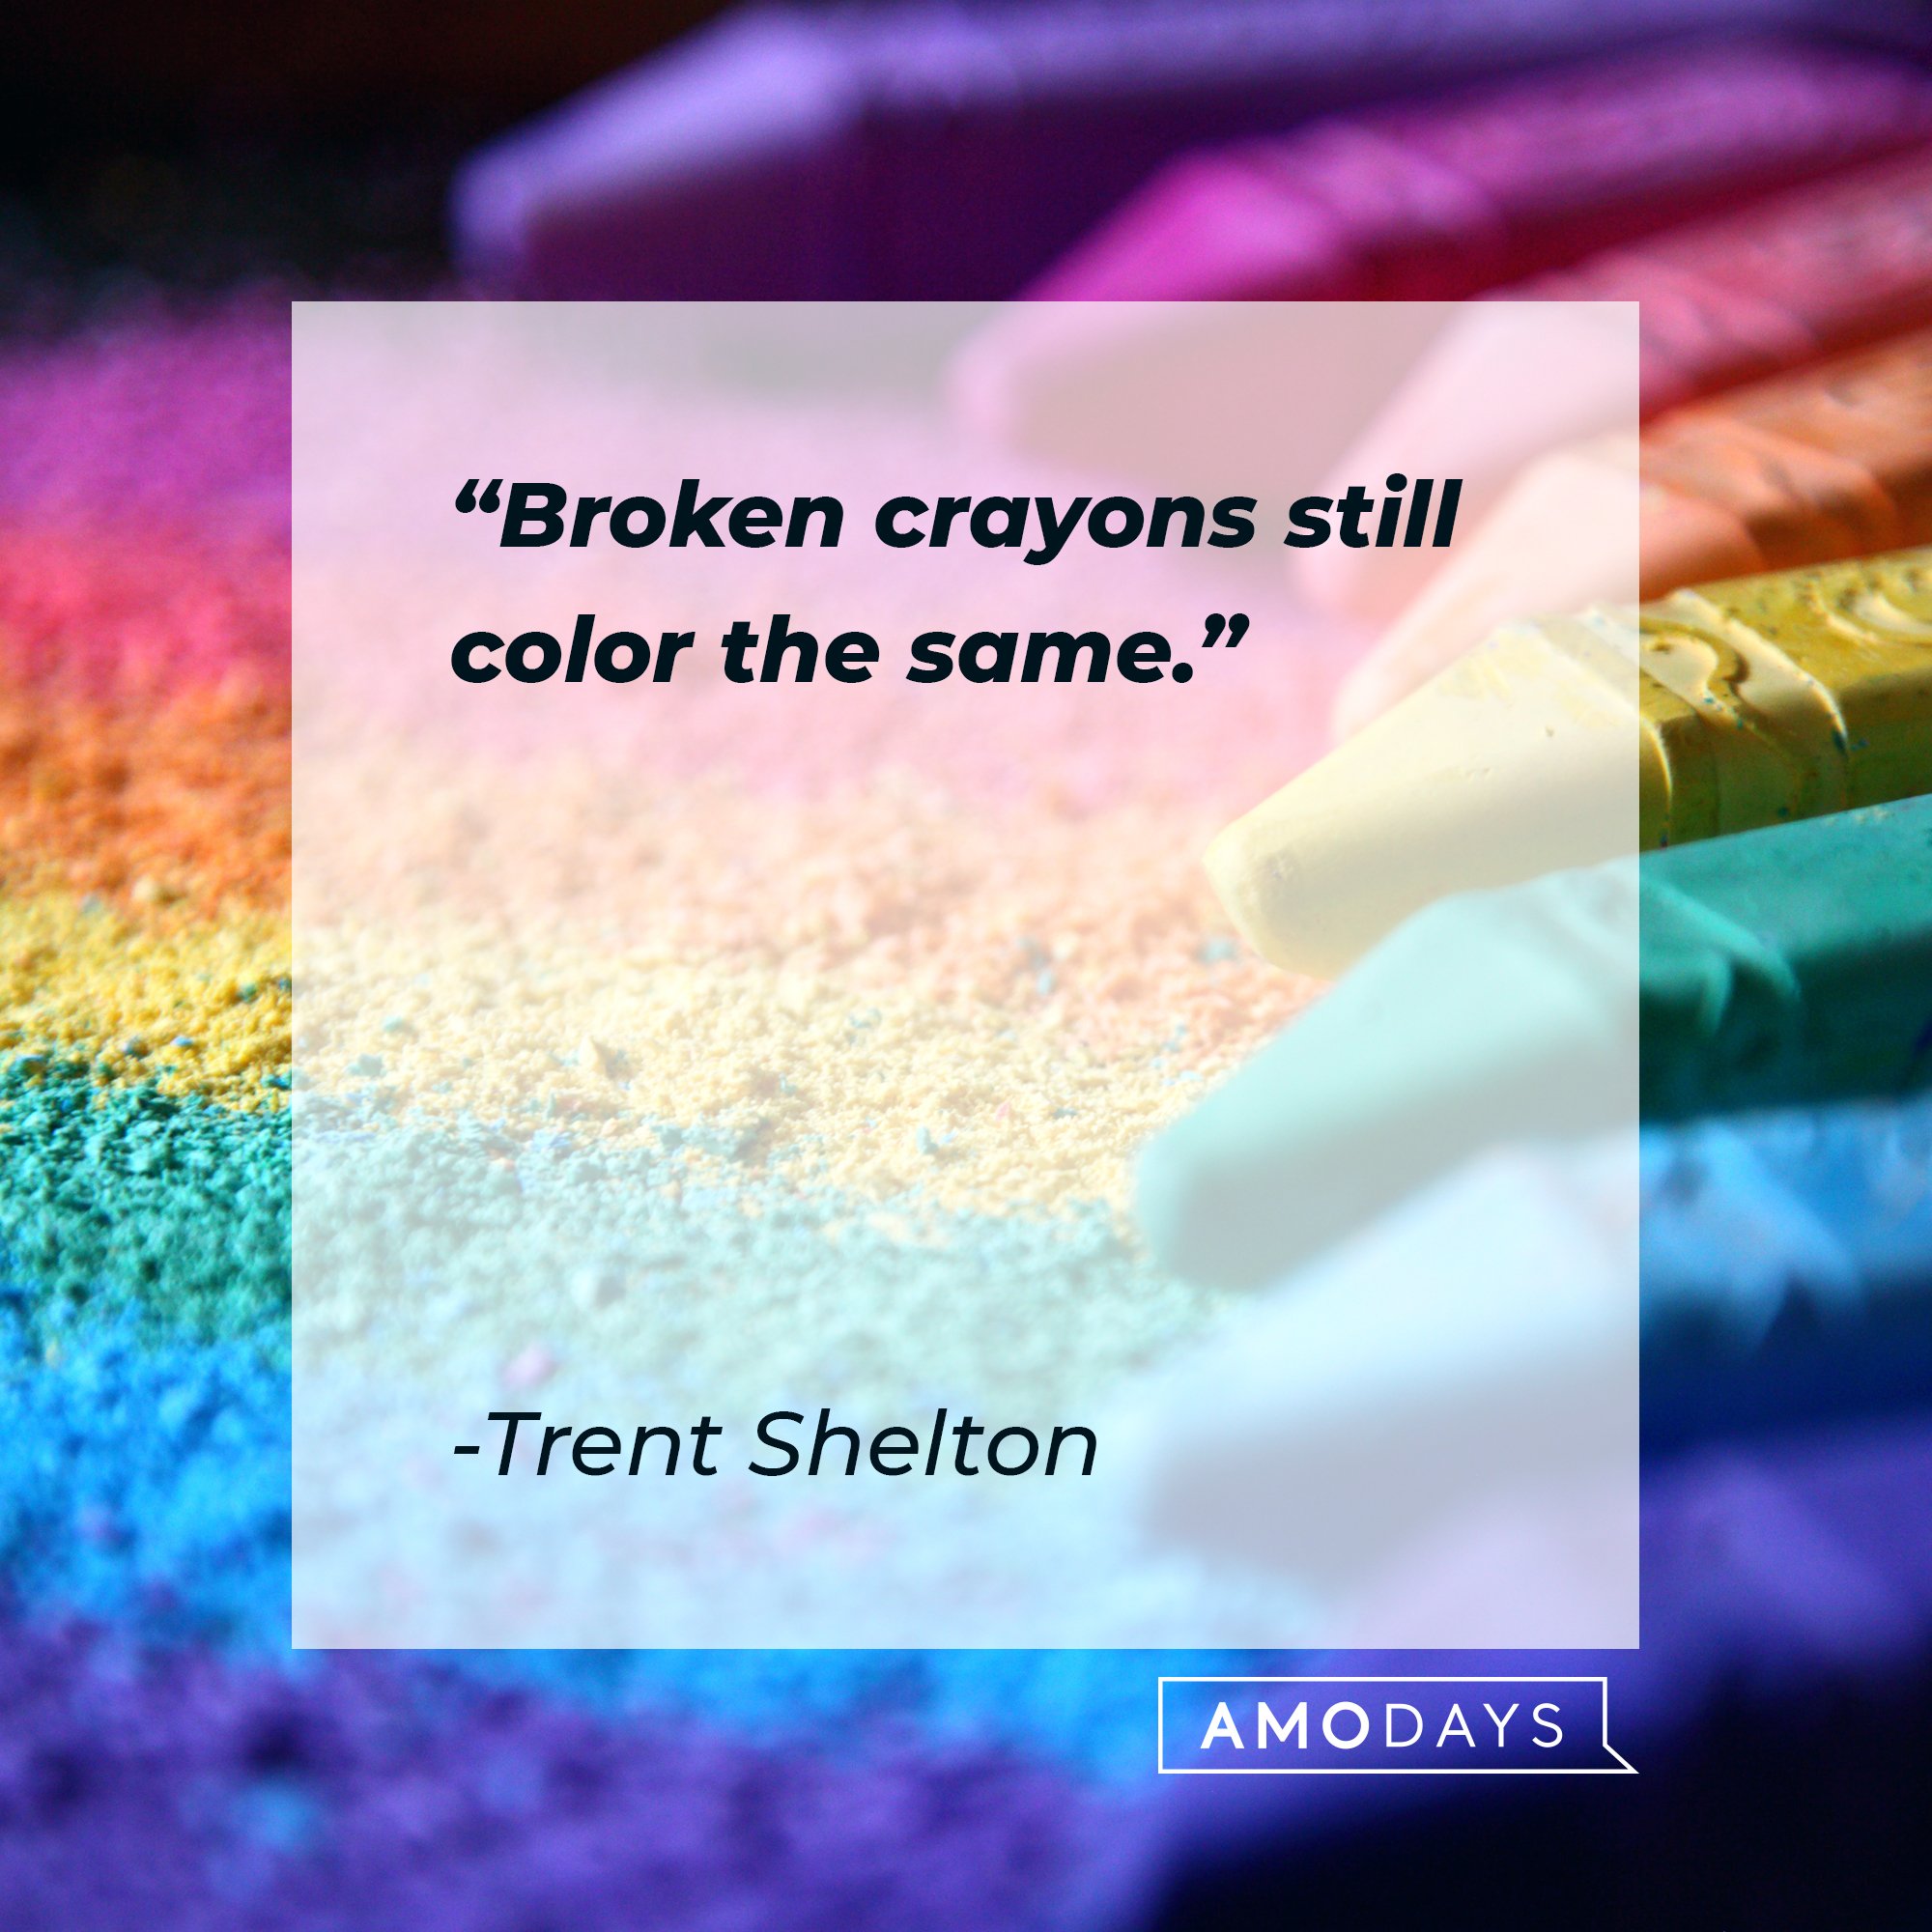 Trent Shelton's quote: "Broken crayons still color the same." | Image: AmoDays